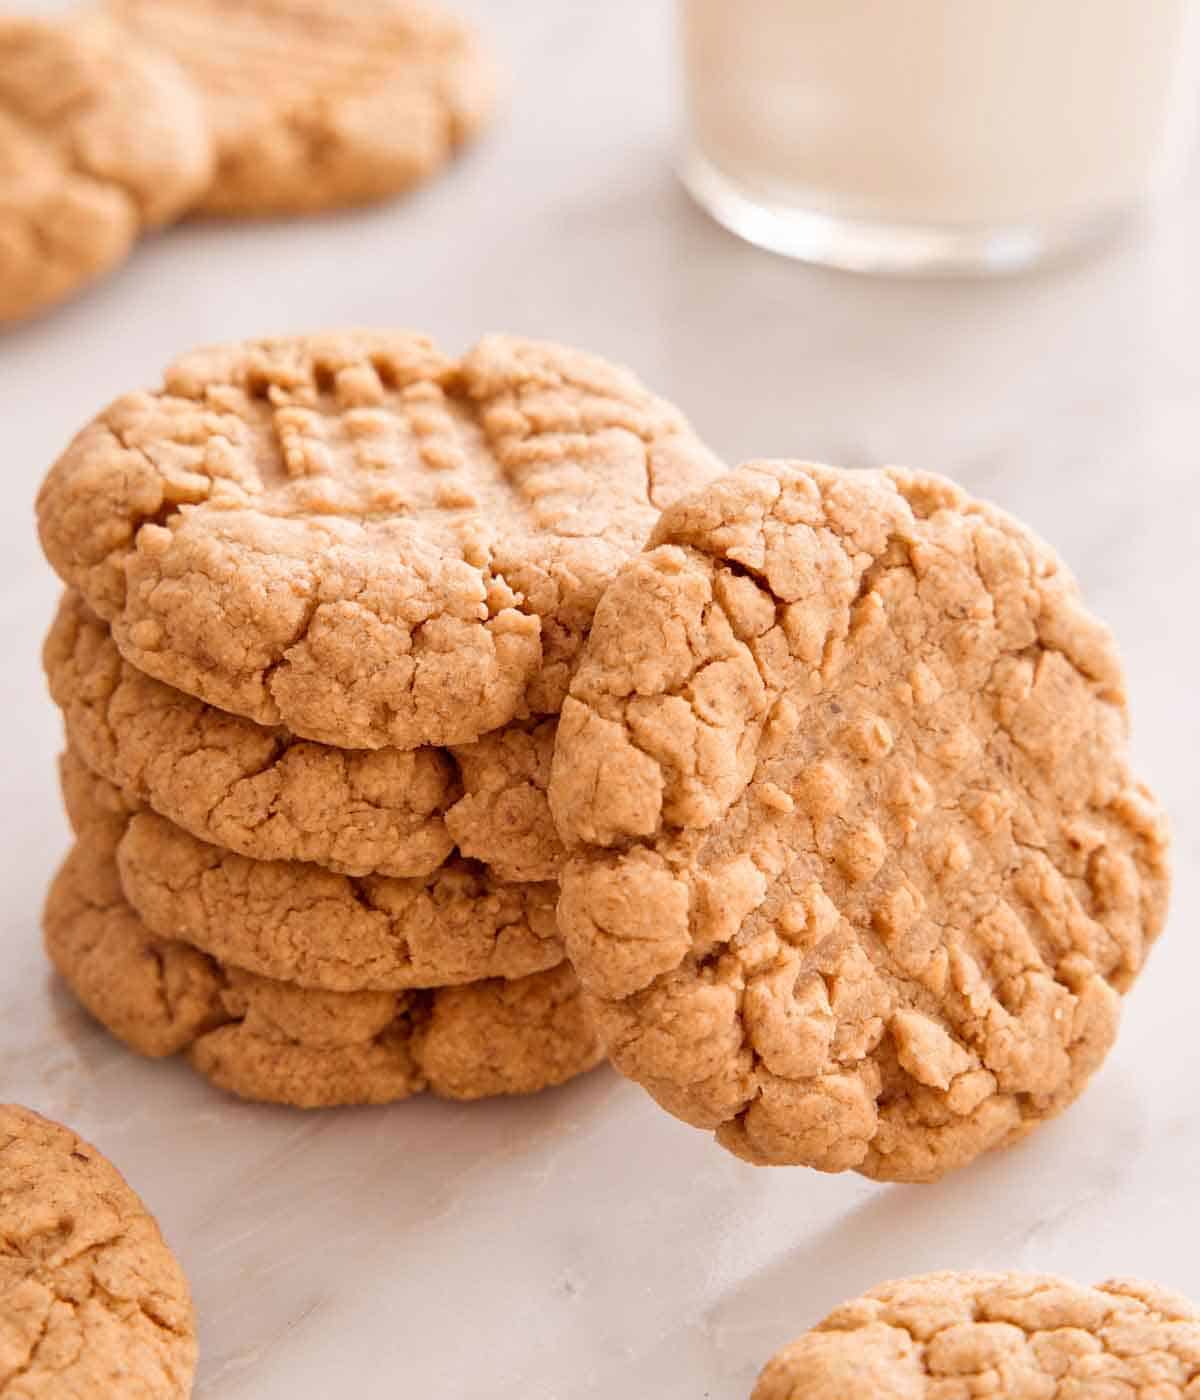 A stack of four almond butter cookies with one cookie leaning on the stack.